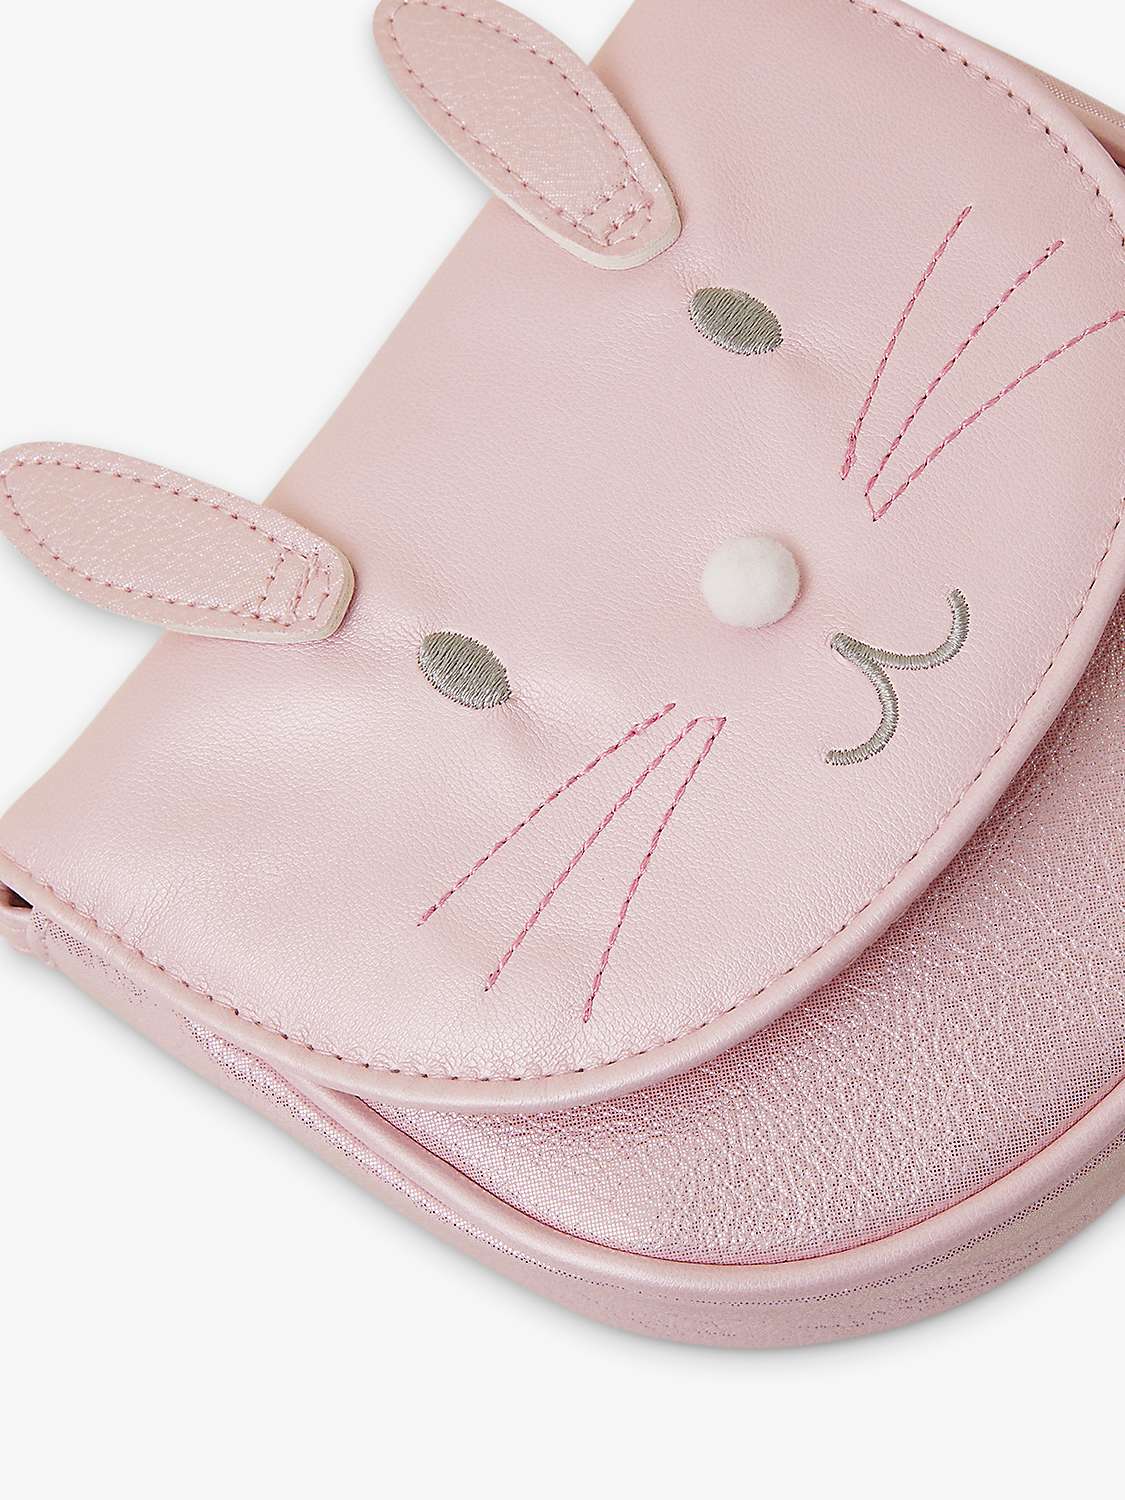 Buy Angels by Accessorize Kids' Bunny Cross Body Bag, Pink Online at johnlewis.com